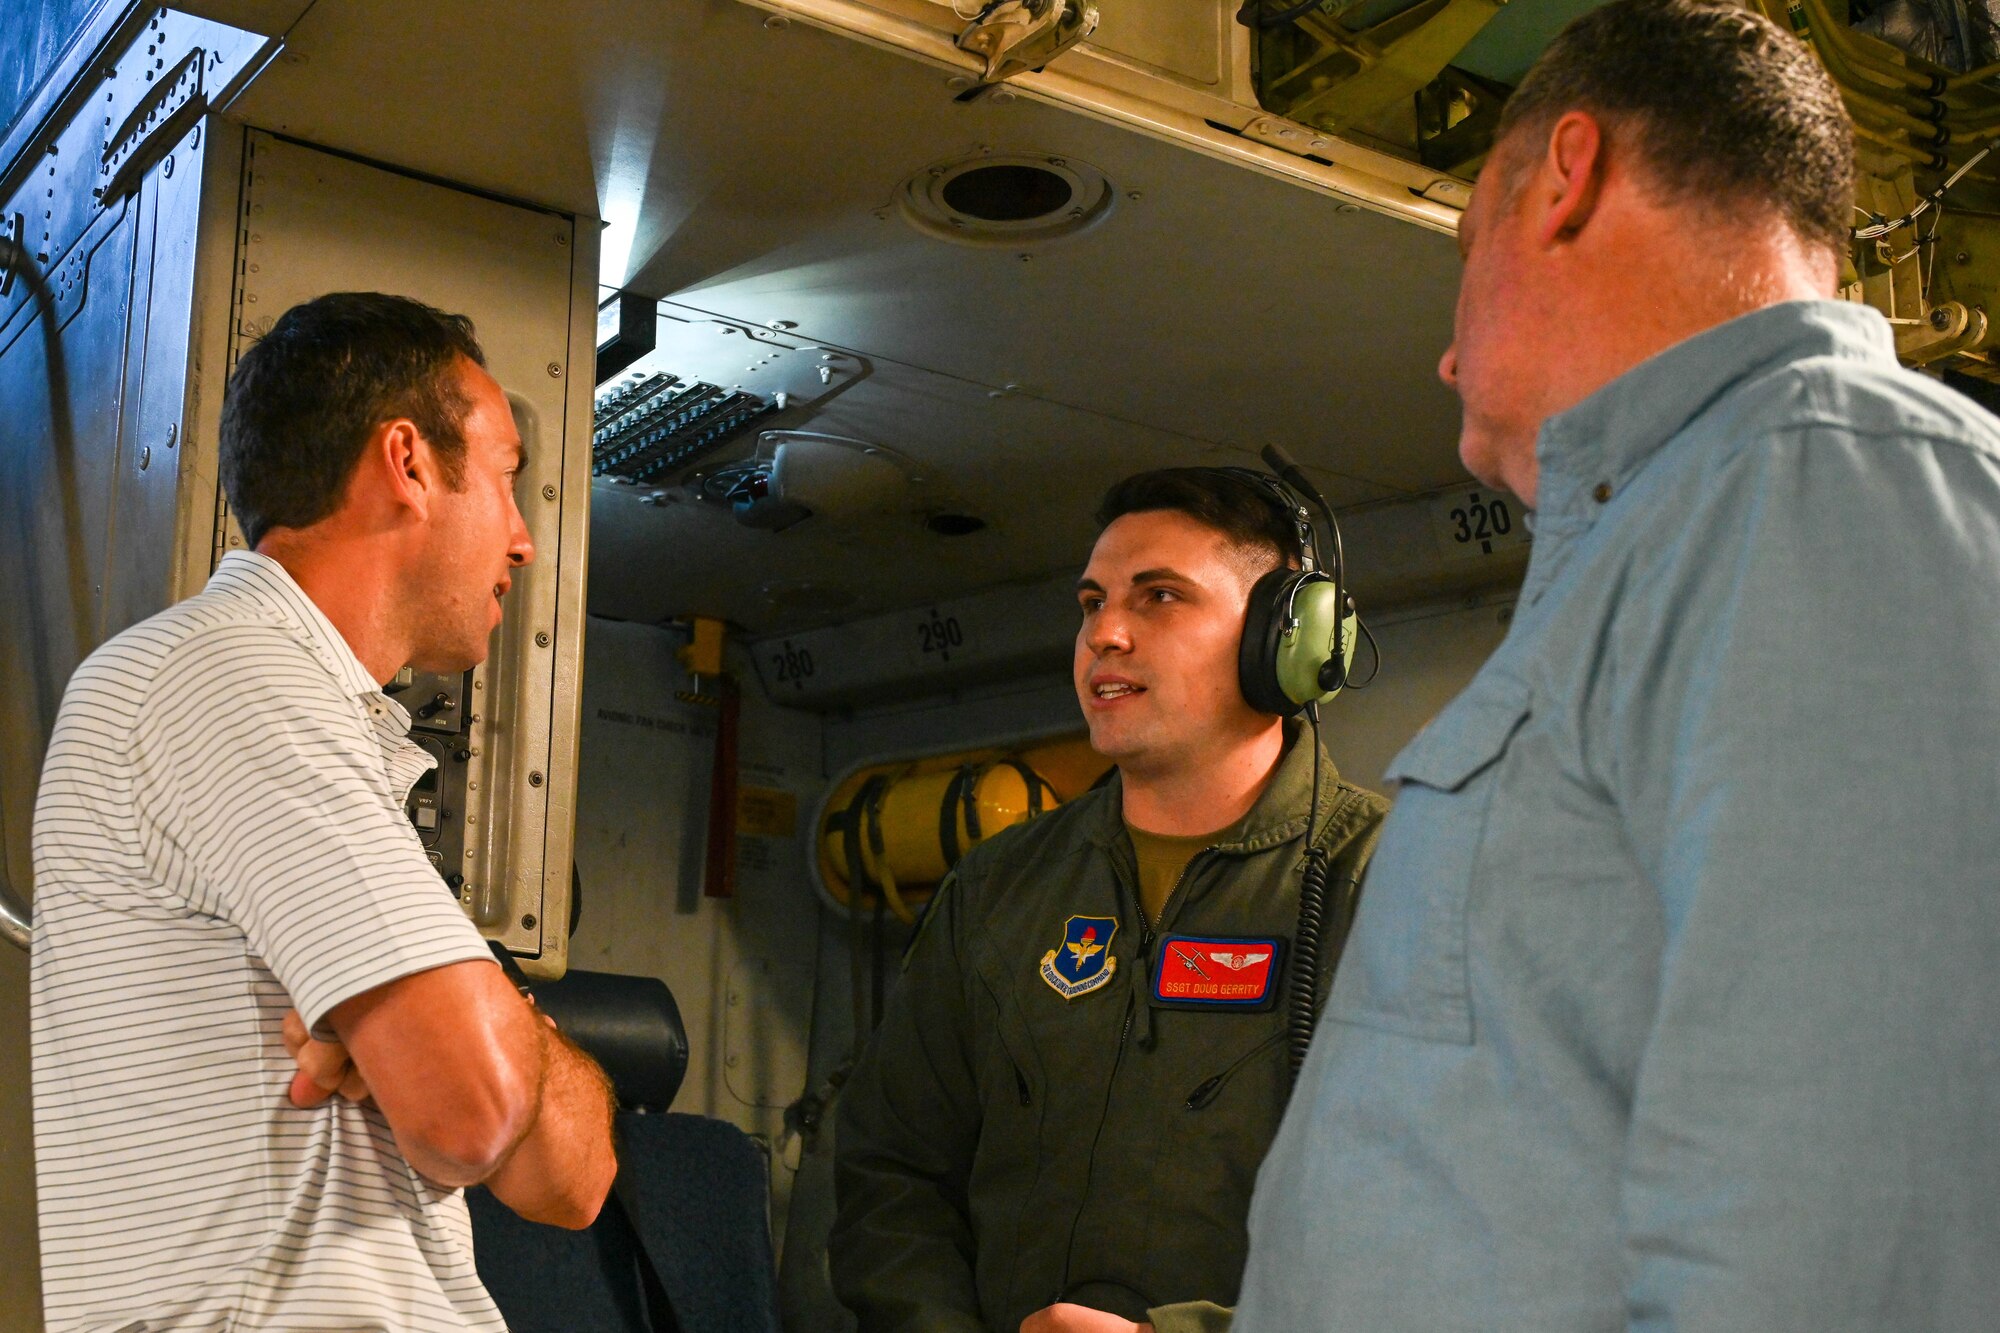 U.S. Air Force Staff Sgt. Doug Gerrity, 58th Airlift Squadron loadmaster instructor, answers questions from Keaton Francis (left) and Brian Lamoreaux (right), Vance Air Force Base (AFB), Oklahoma, civic leaders, while on a C-17 Globemaster III, June 6, 2023. Altus AFB trains 70% of all mobility aircrew members in the Air Force, while Vance AFB trains more than 300 pilots a year, 60 percent of whom move onto Altus for their formal training on the KC-135 Stratotanker, KC- 46 Pegasus, or C-17. (U.S. Air Force photo by Senior Airman Trenton Jancze)